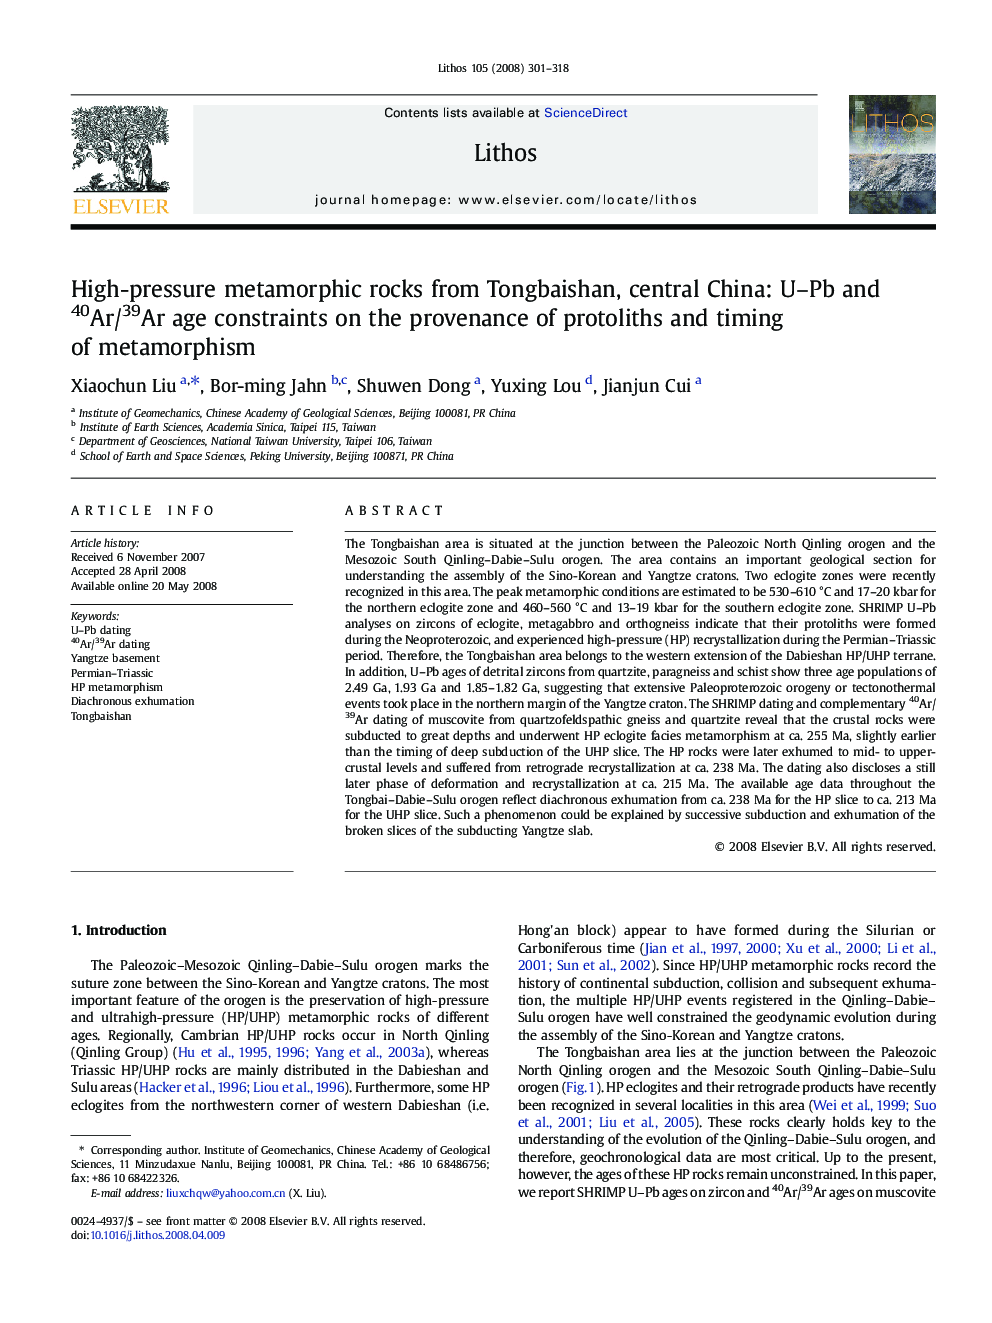 High-pressure metamorphic rocks from Tongbaishan, central China: U-Pb and 40Ar/39Ar age constraints on the provenance of protoliths and timing of metamorphism